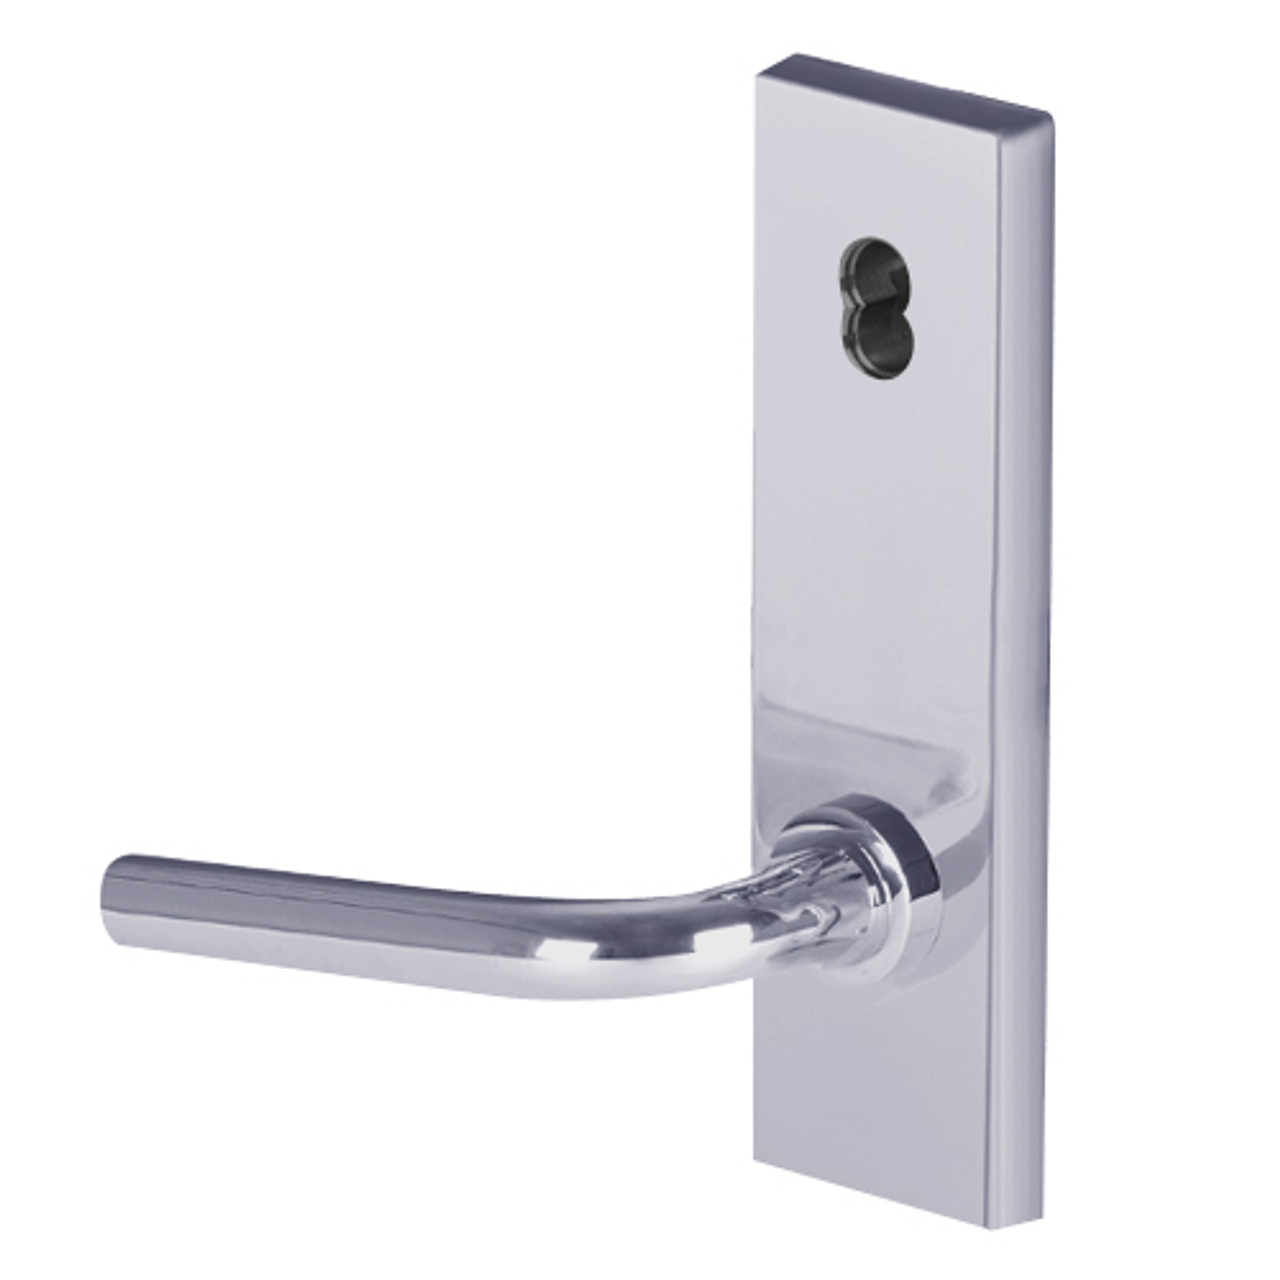 45HW7TWEL12N626 Best 40HW series Double Key Deadbolt Fail Safe Electromechanical Mortise Lever Lock with Solid Tube w/ No Return Style in Satin Chrome